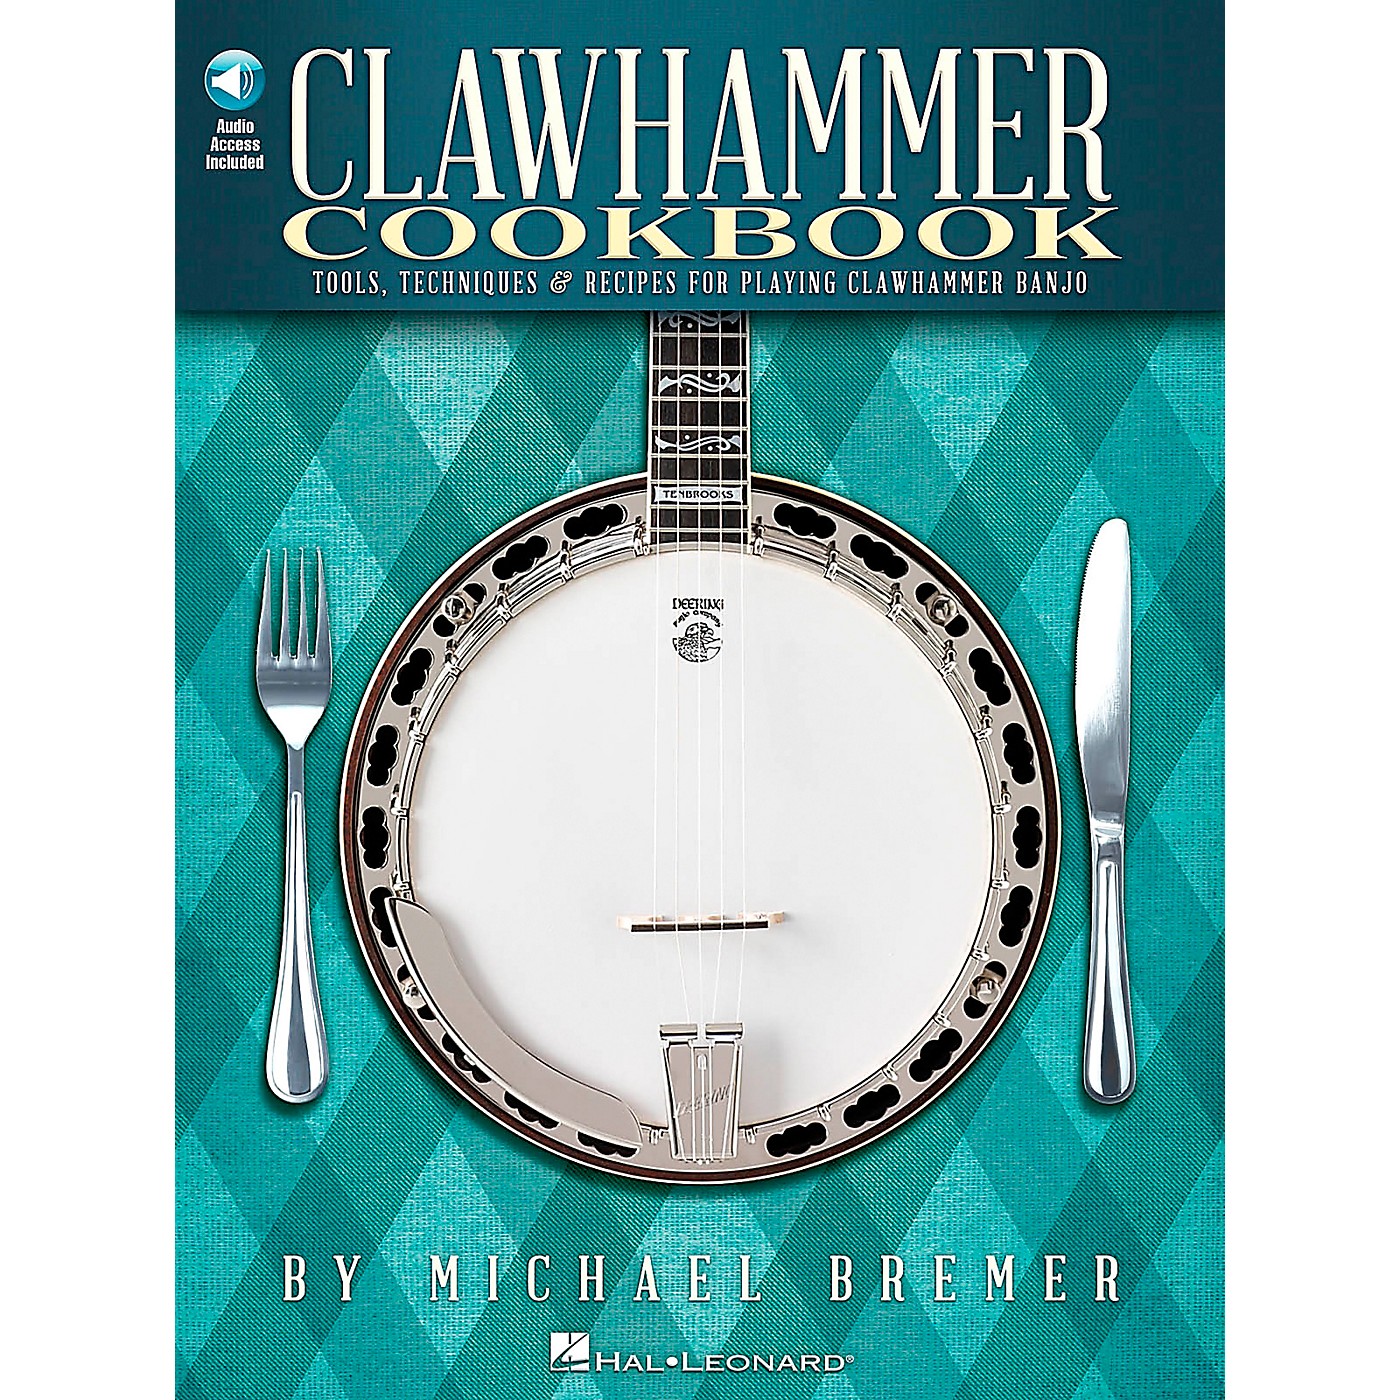 Hal Leonard Clawhammer Cookbook - Tools, Techniques & Recipes For Playing Clawhammer Banjo Book/CD thumbnail